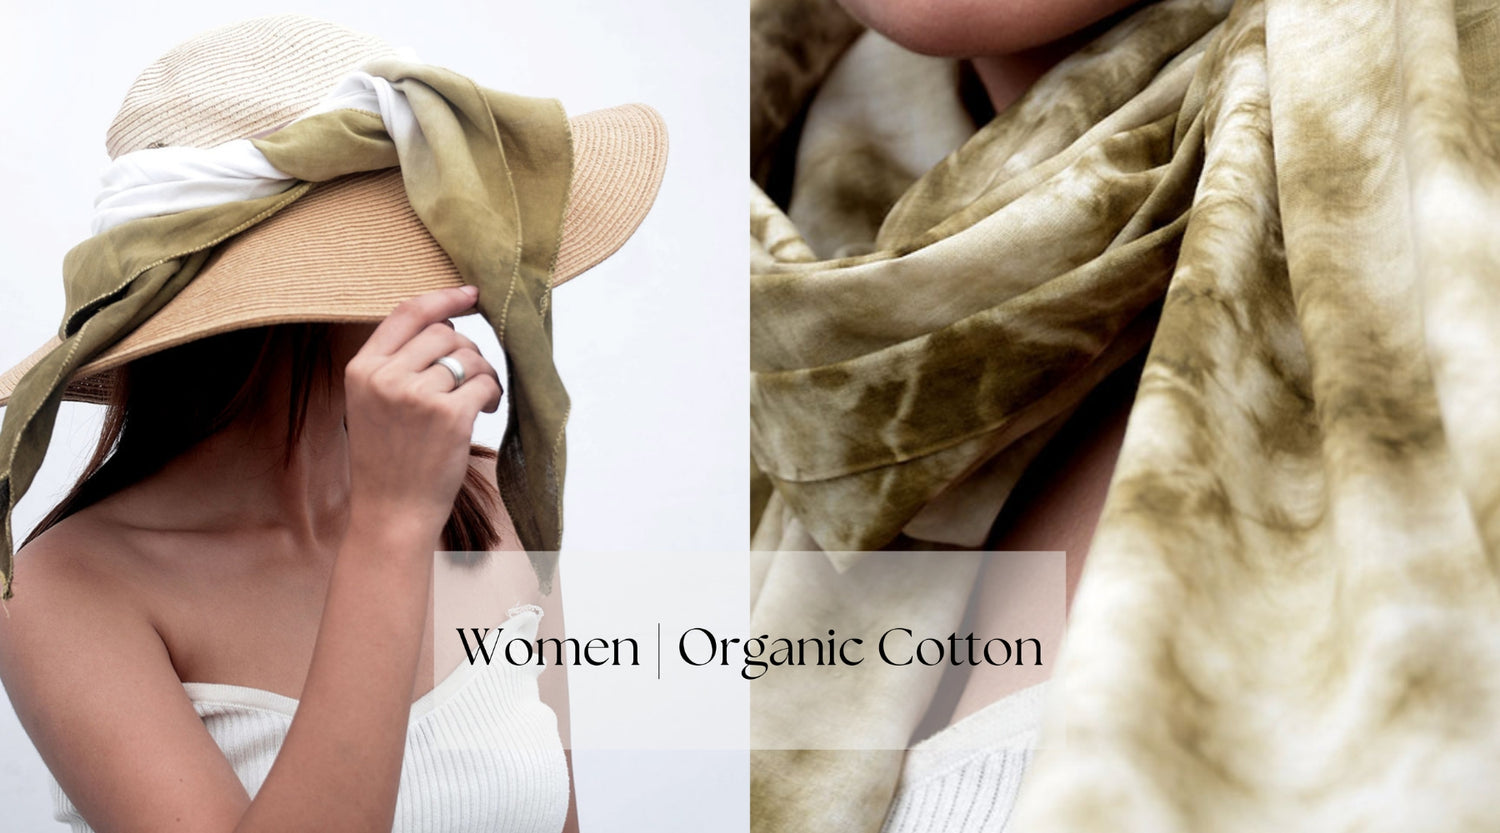 WeaveTogether: Empowering Women with Organic Cotton